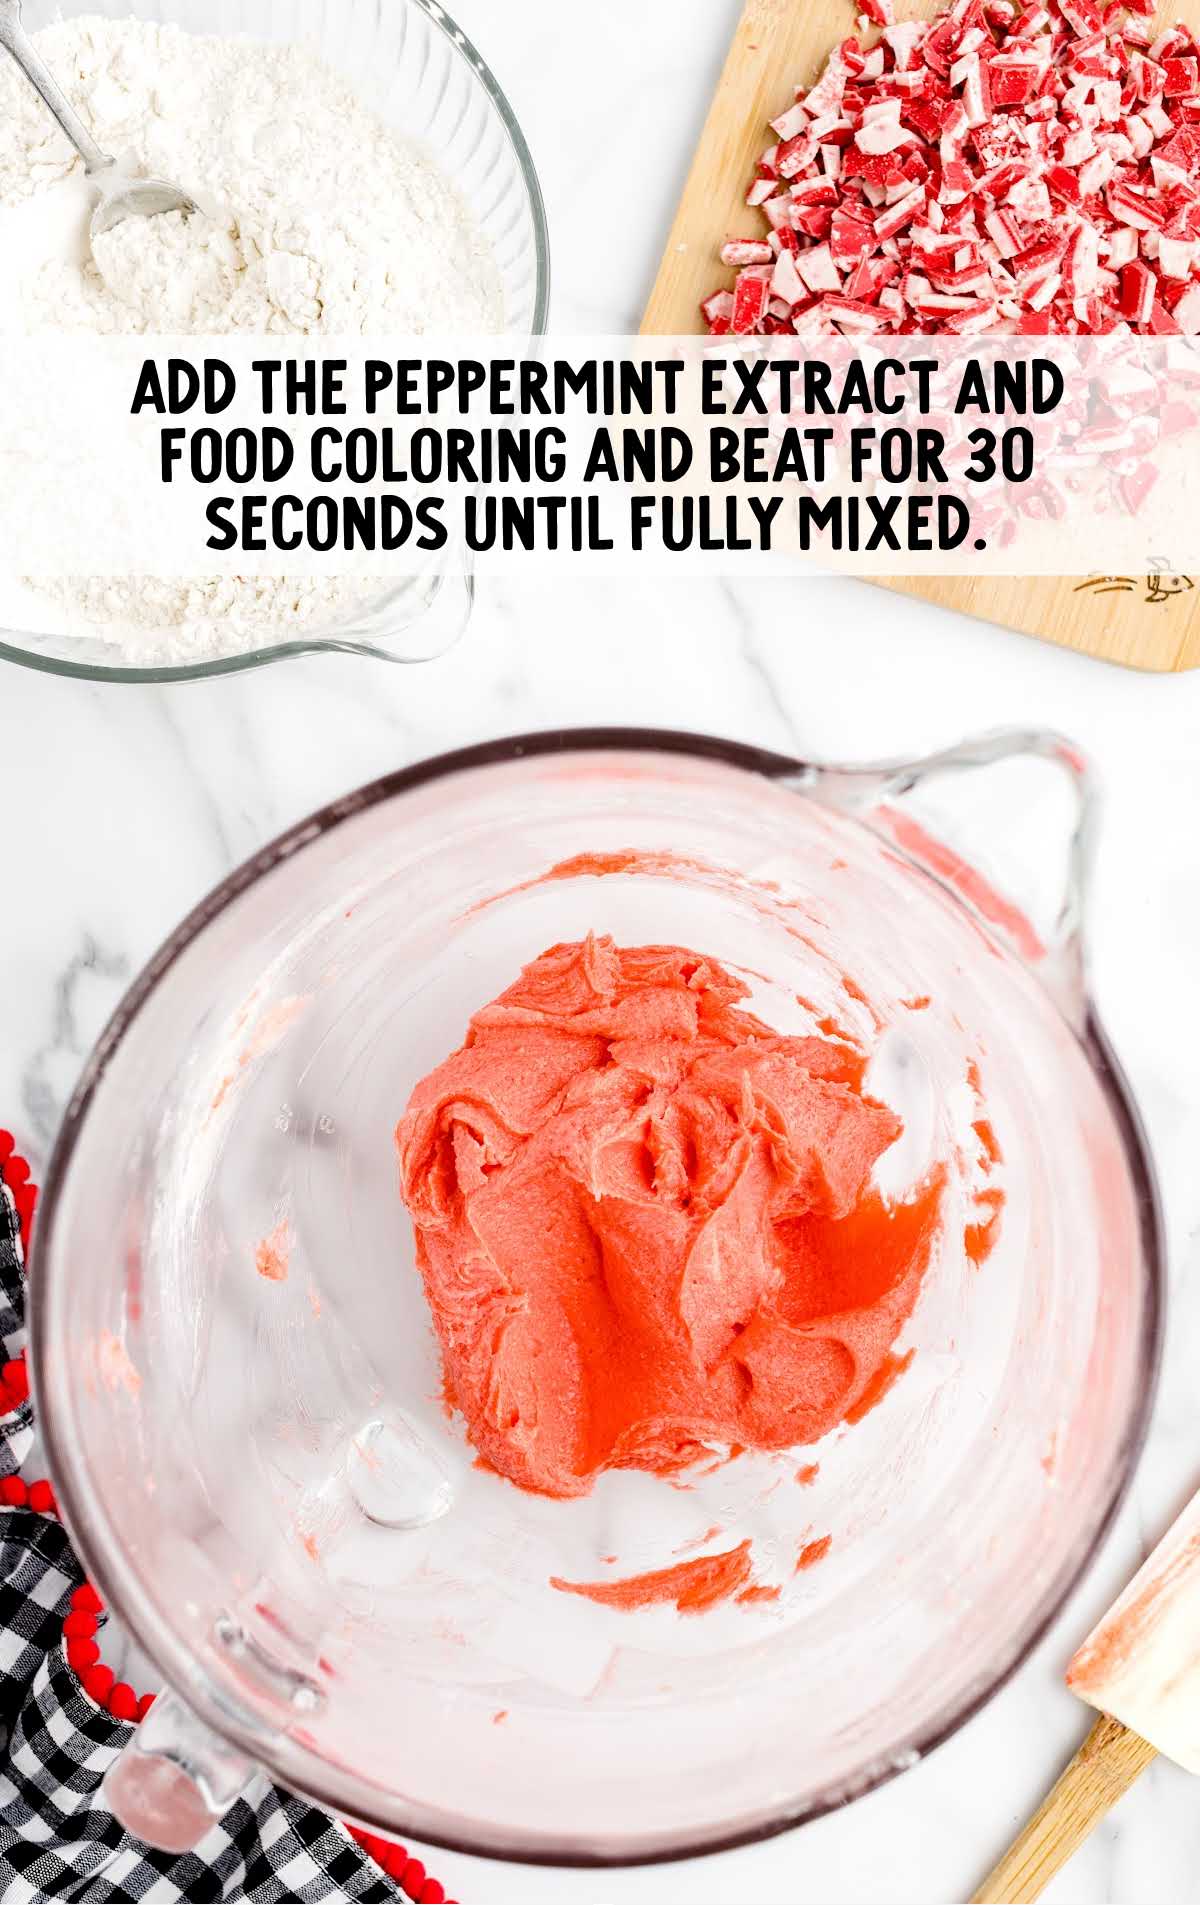 peppermint extract and food coloring added to the butter mixture in a measuring cup